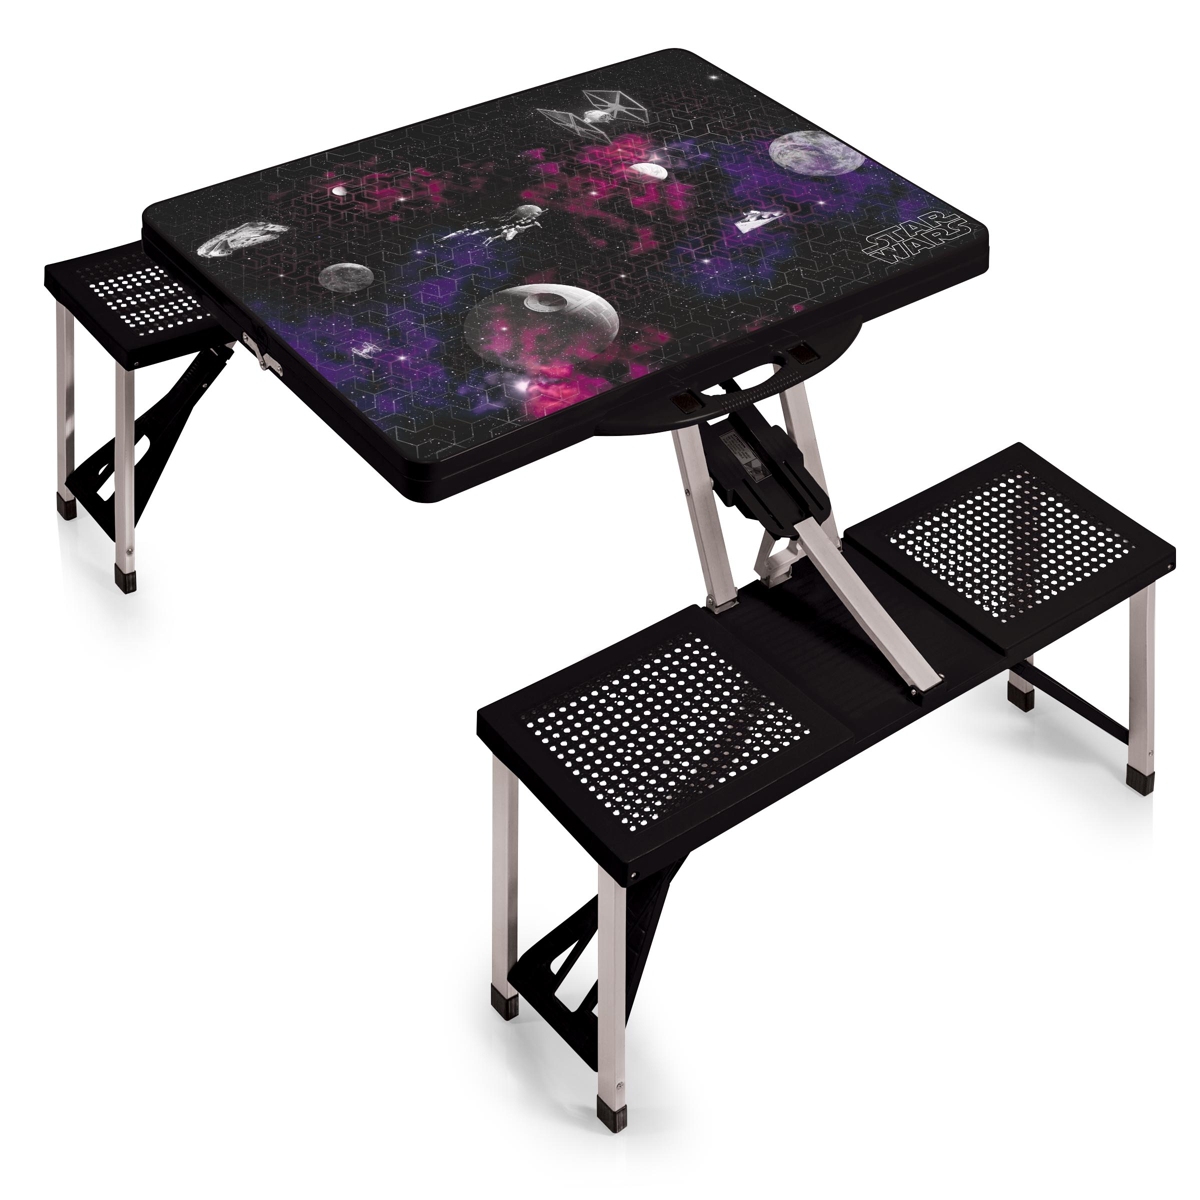 Death Star - Picnic Table Sport Portable Folding Table with Seats - Black